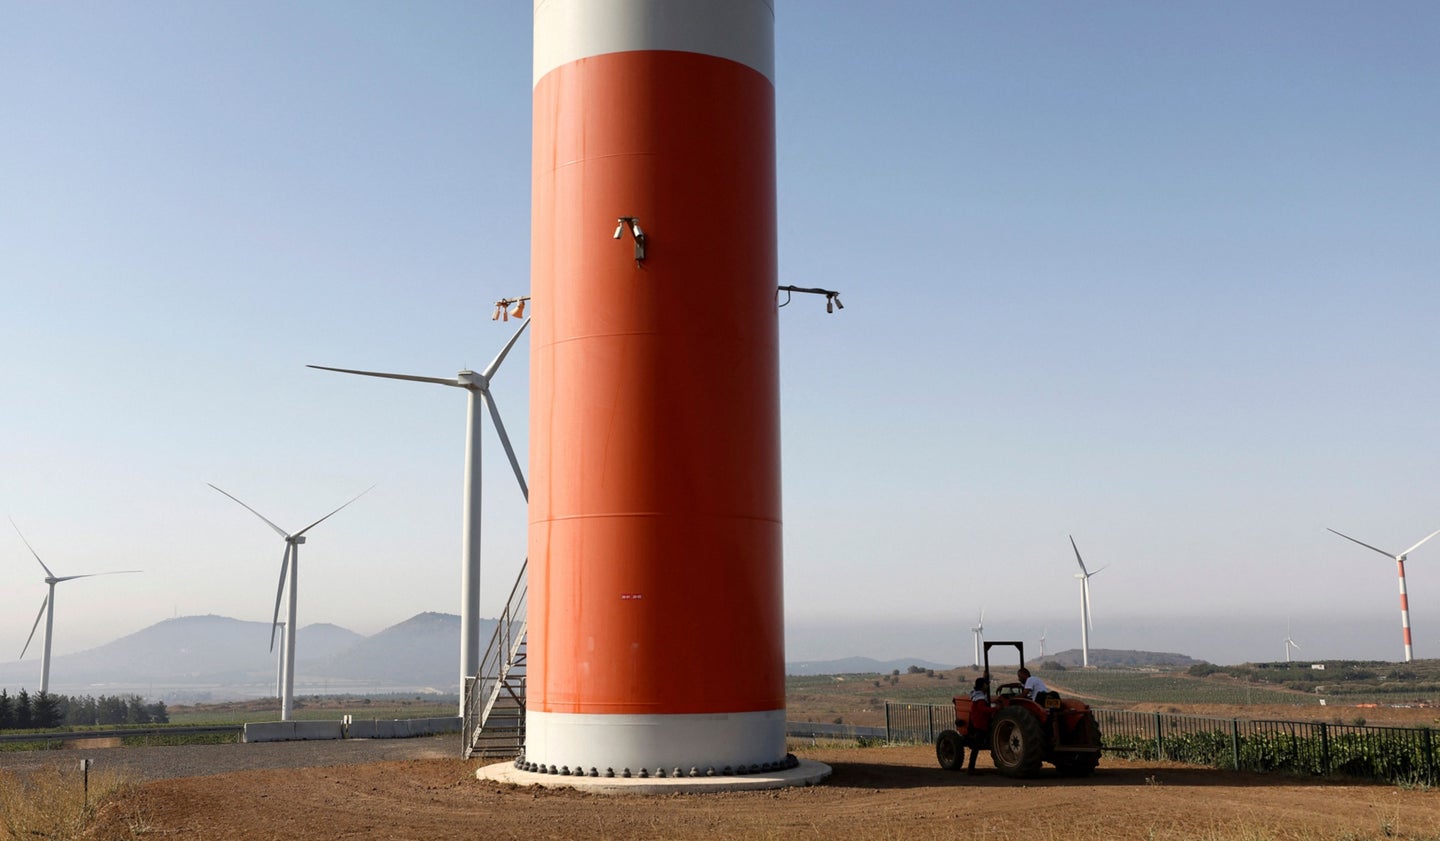 Wind turbine with red base in the Golan Heights between Syria and Israel